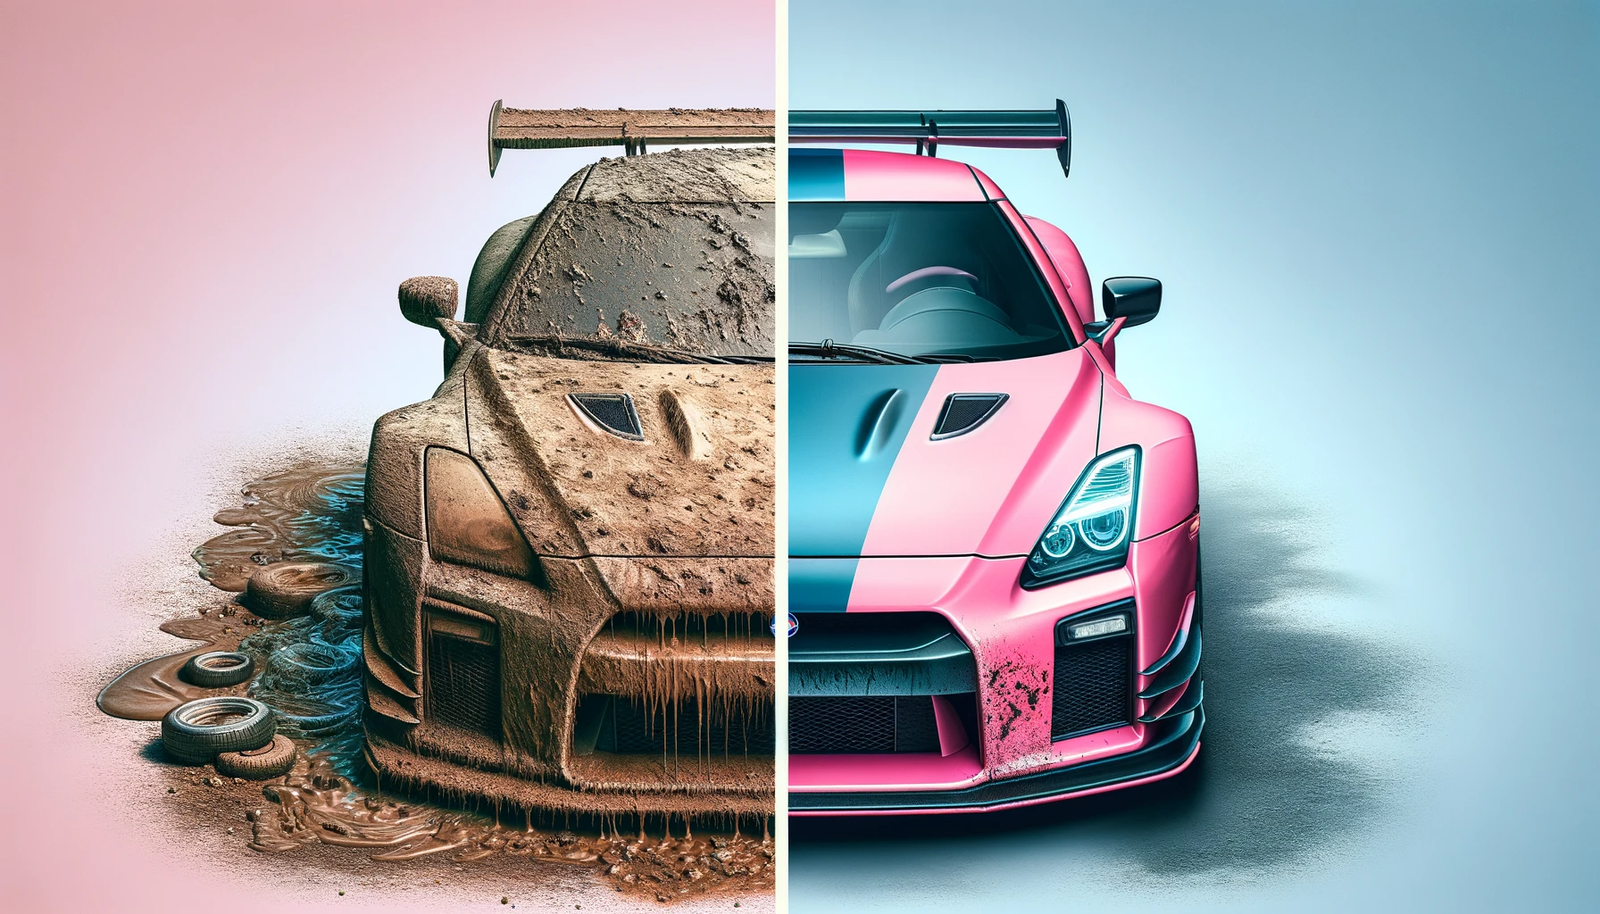 Side-by-side comparison of a sports car: On the left, the car is extremely dirty, covered in mud and looking neglected, against a pink background. On the right, the same model of car is spotlessly clean, shiny, and looks brand new, set against a blue background, illustrating the result of professional car detailing.